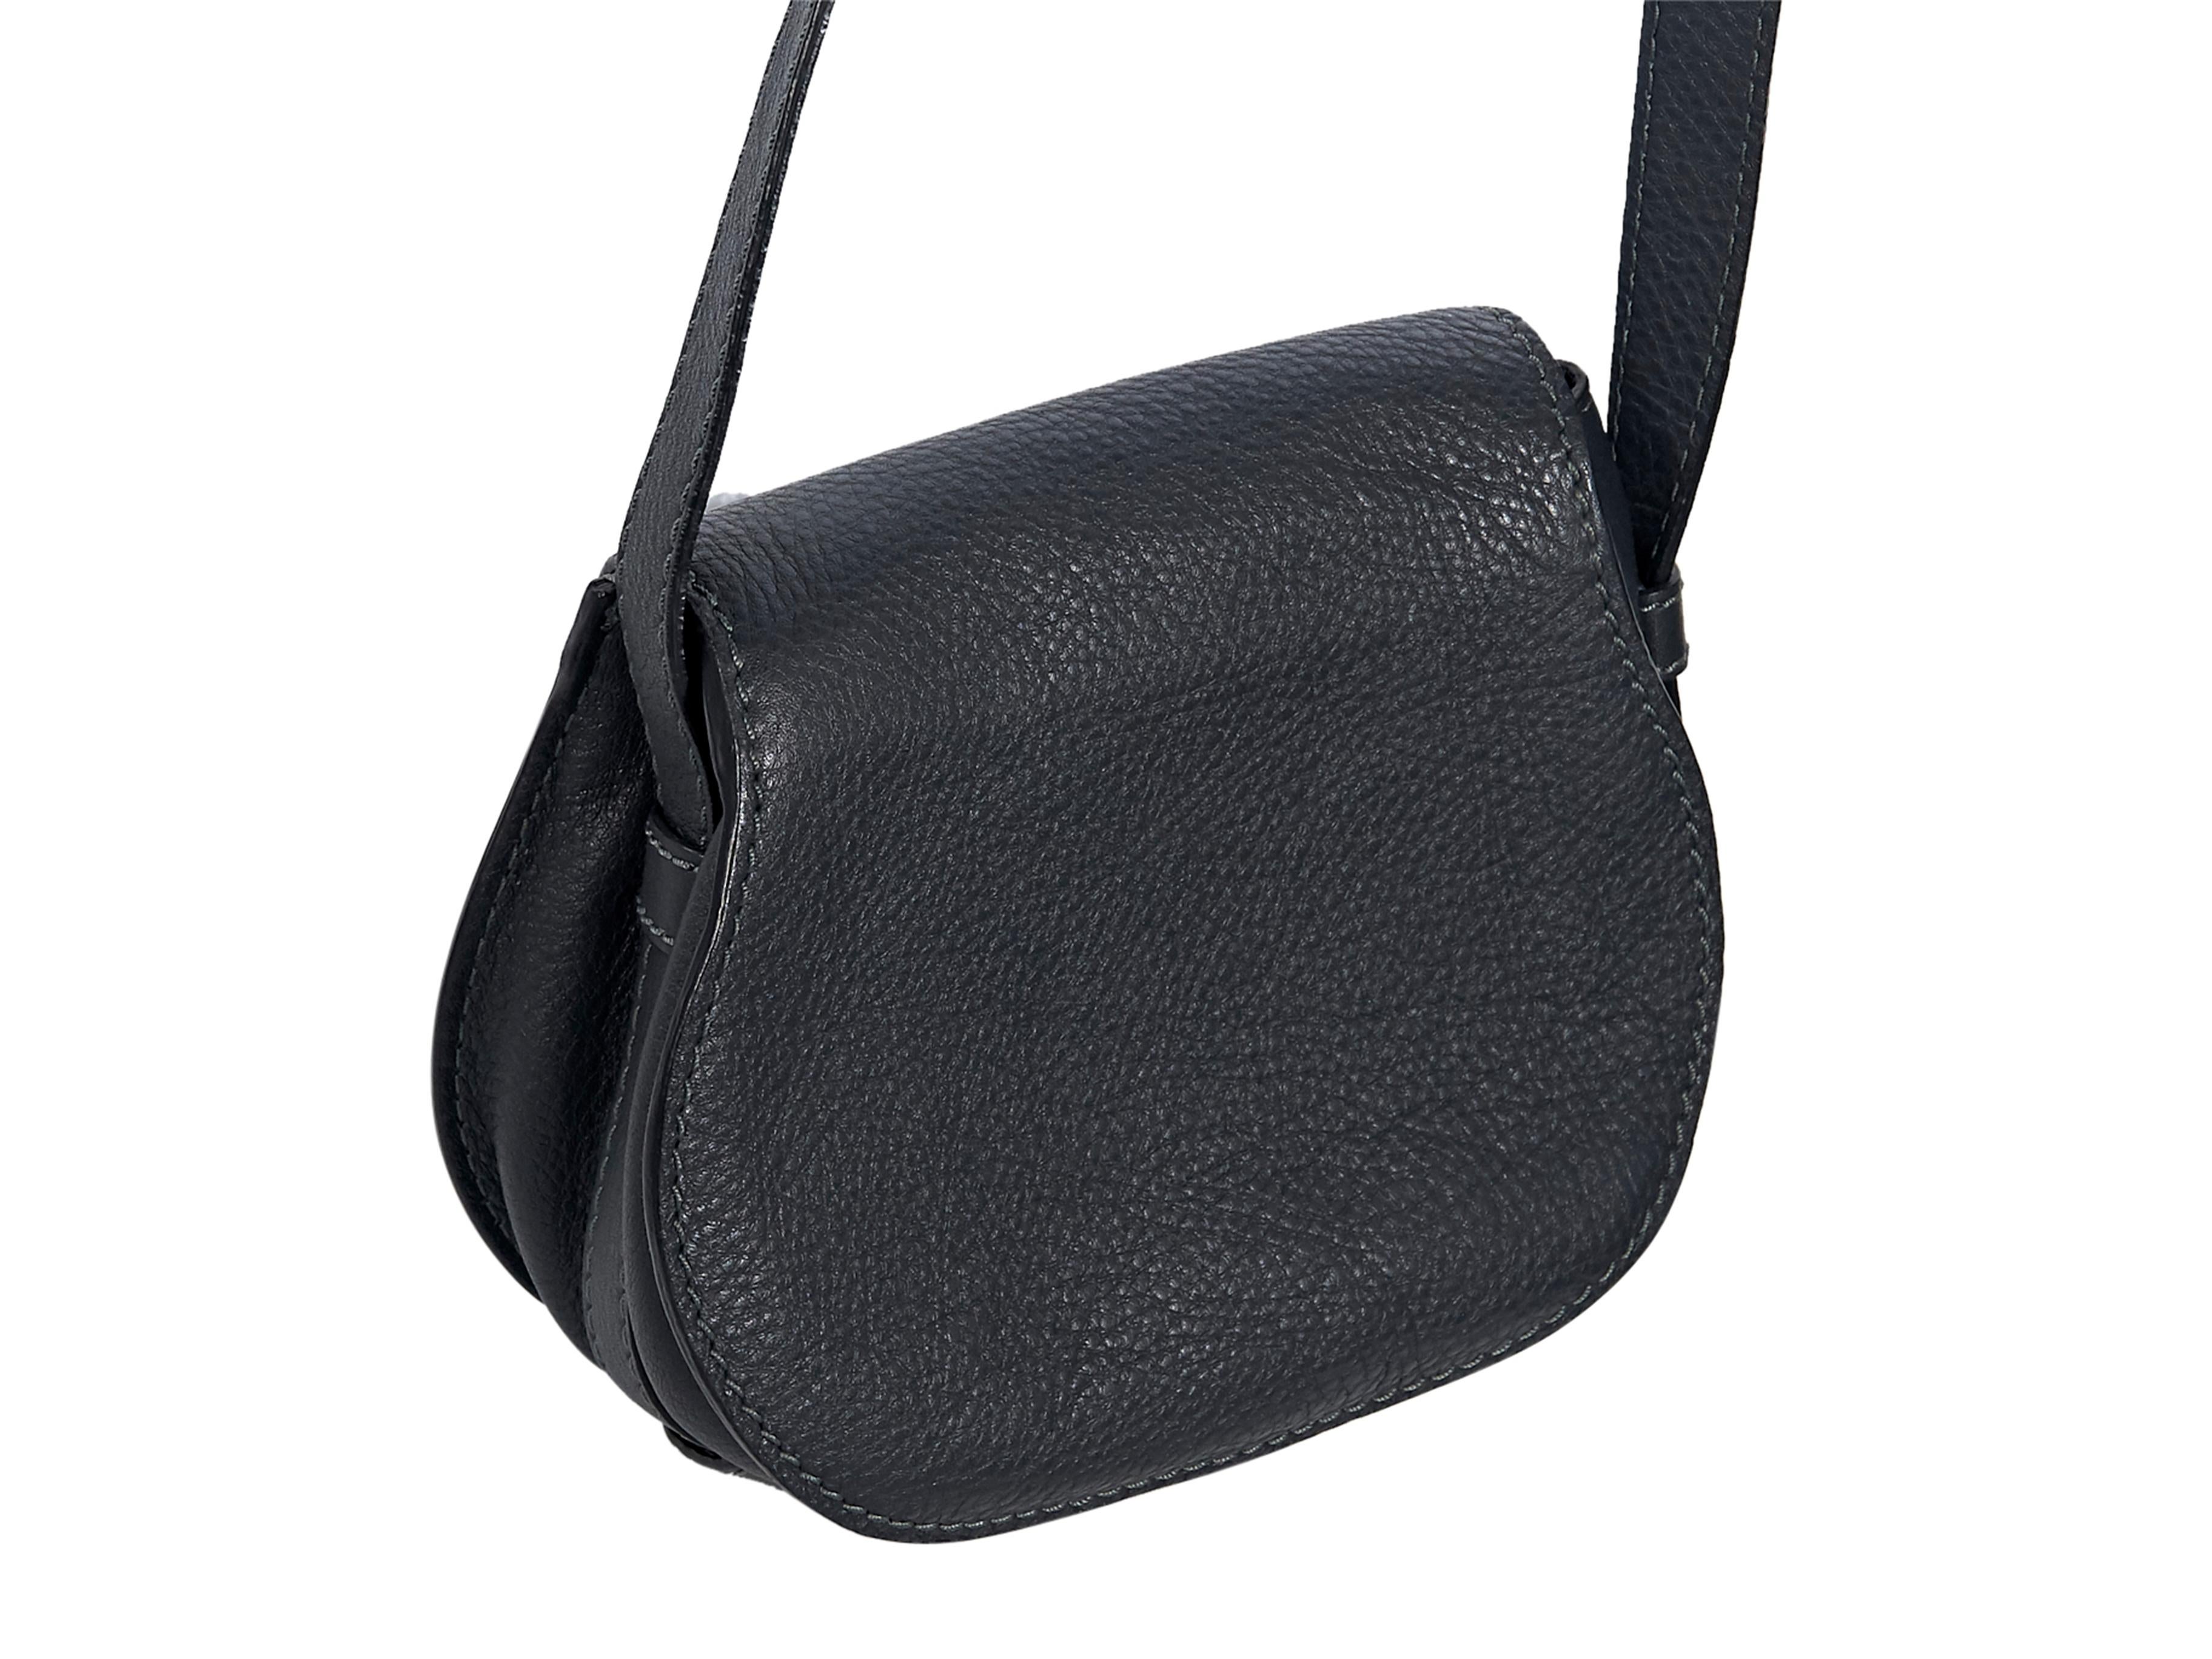 Product details:  Dark navy blue leather Marcie saddle bag by Chloe.  Adjustable crossbody strap.  Front flap with toggle tab closure.  Lined interior with inner slide pocket.  Goldtone hardware.  6.5